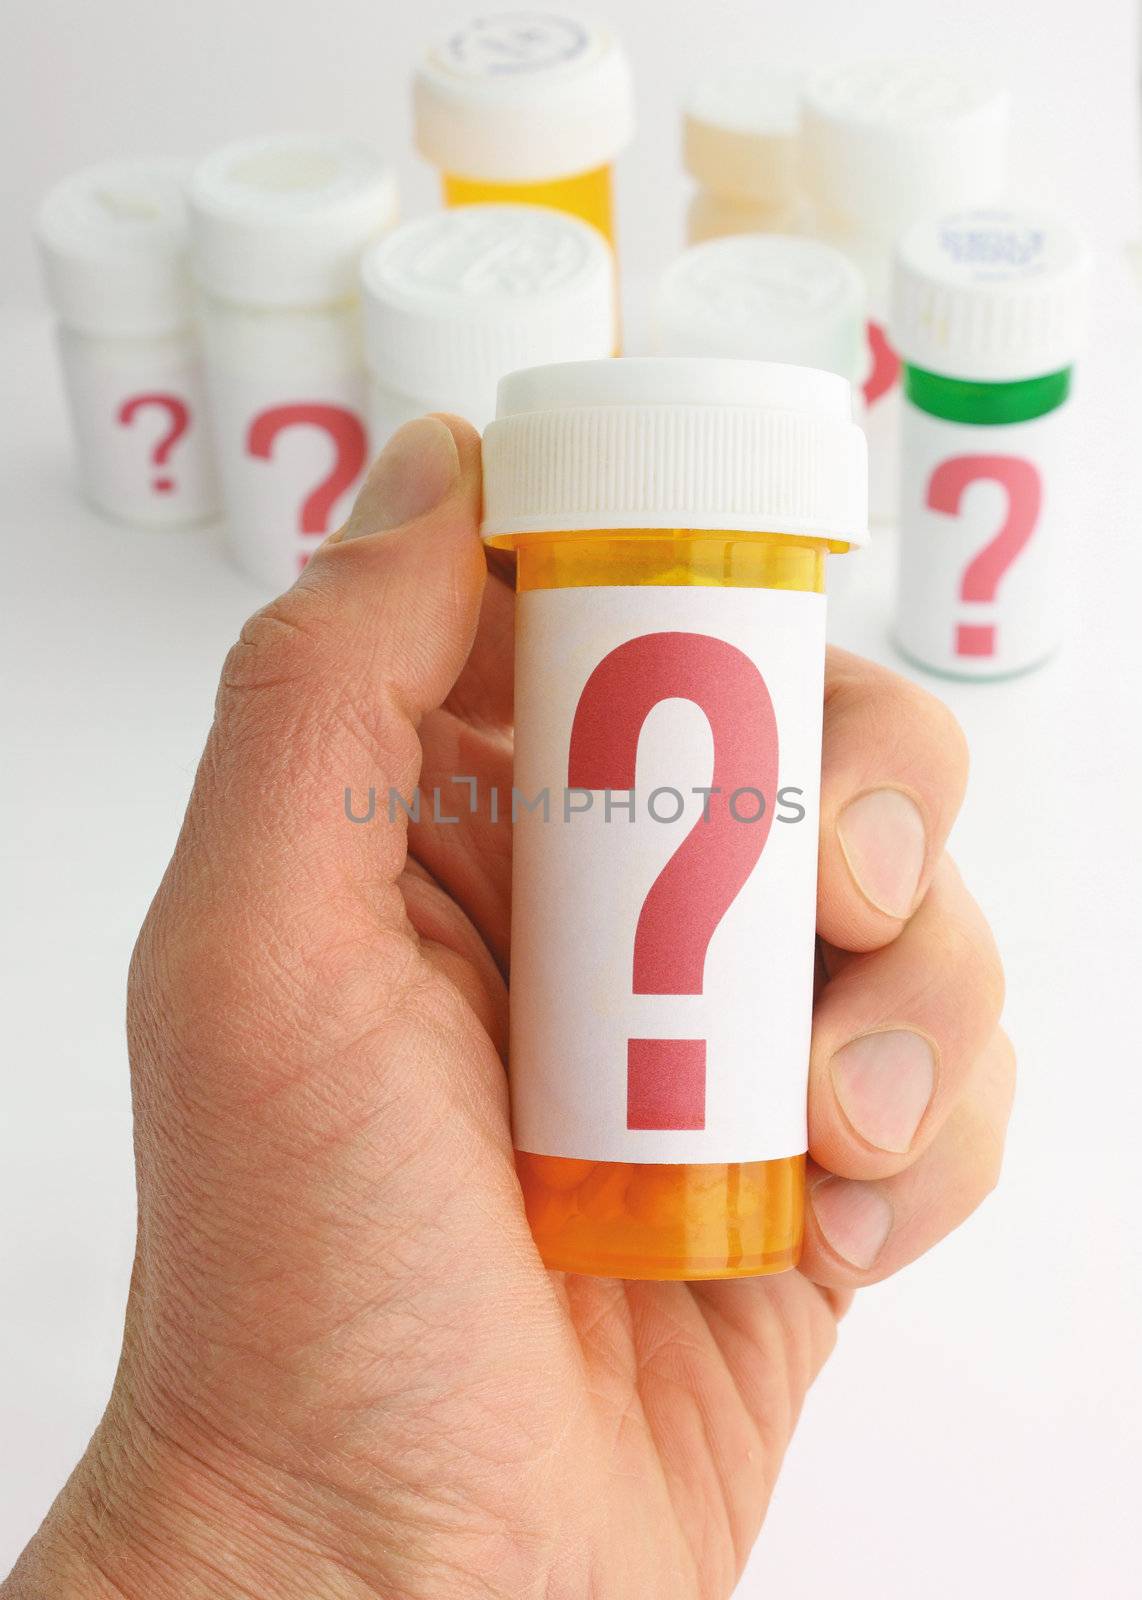 closeup of a hand holding a medicine bottle marked with a large question mark. In the background is a group of pill bottles all labeled with large question marks. Image uses a somewhat shallow depth of field and background is moderately out of focus.